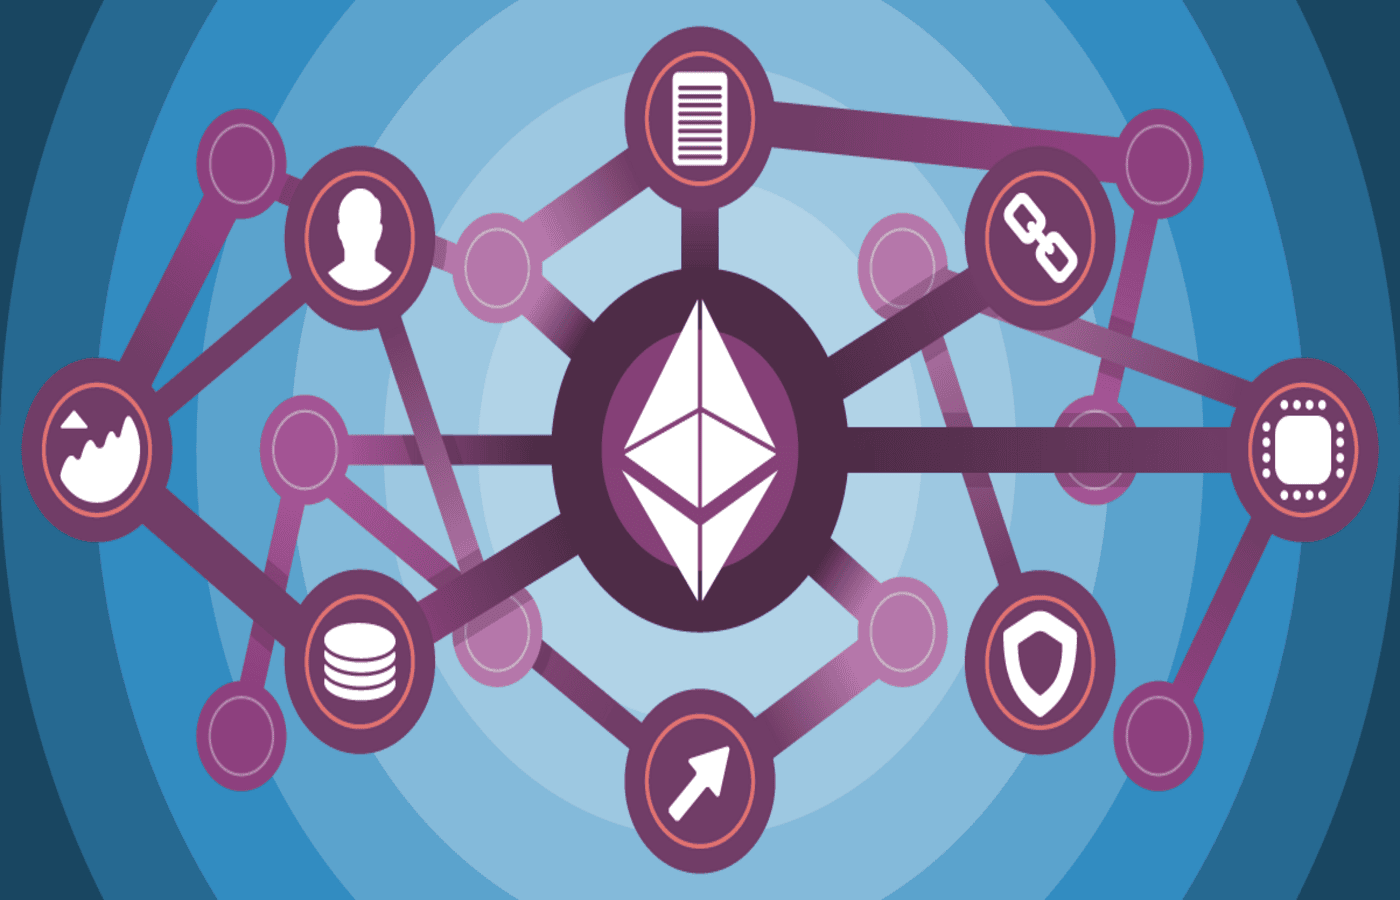 Ethereum L2s to Reach $1T Market Cap by 2030: VanEck Analysts